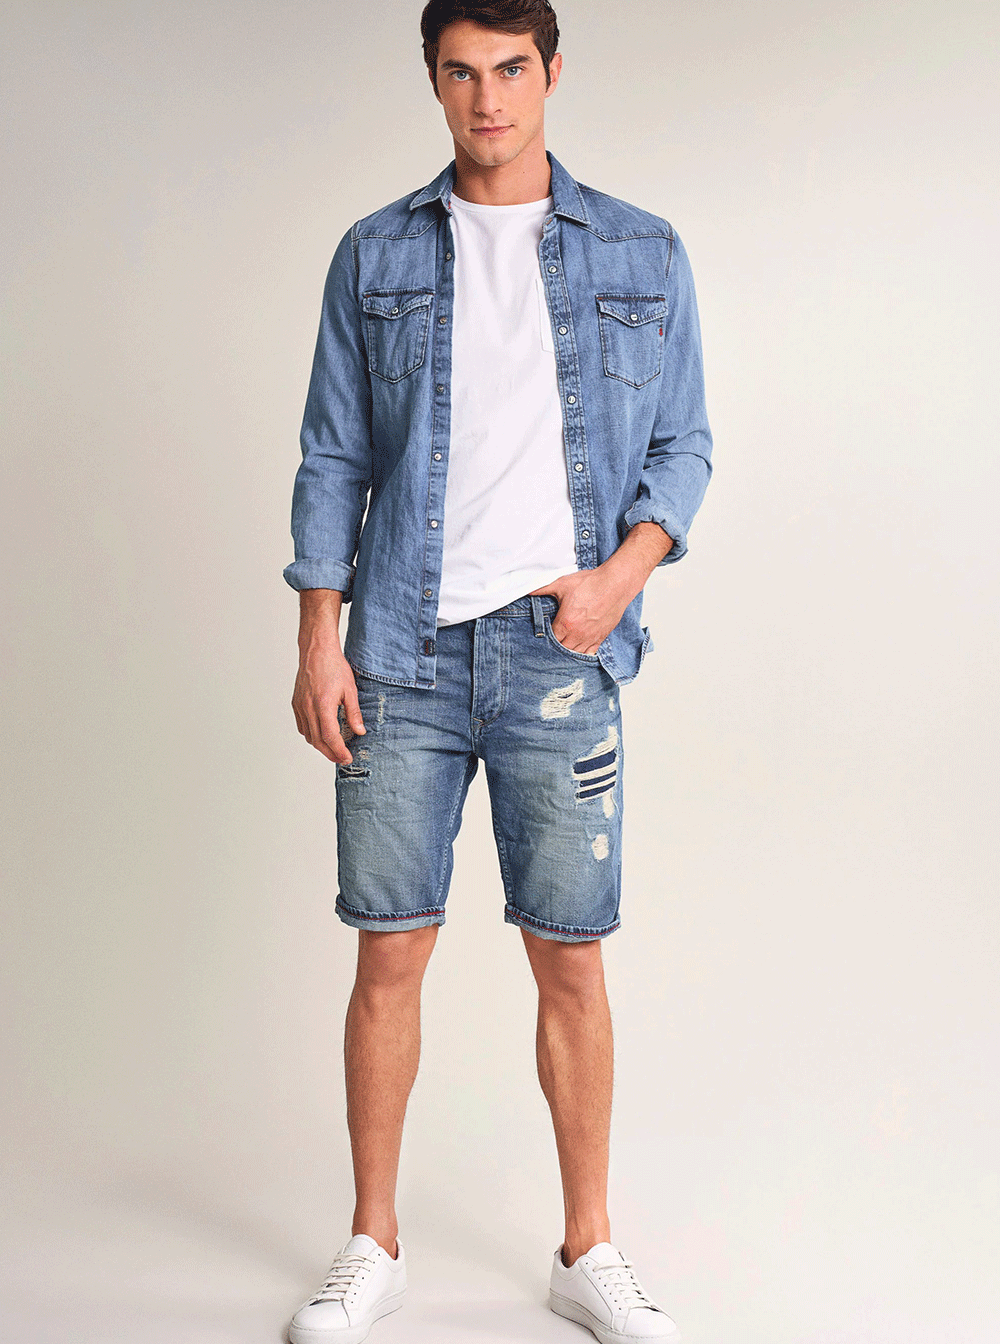 Blue Denim Shorts Outfits For Men (143 ideas & outfits) | Lookastic